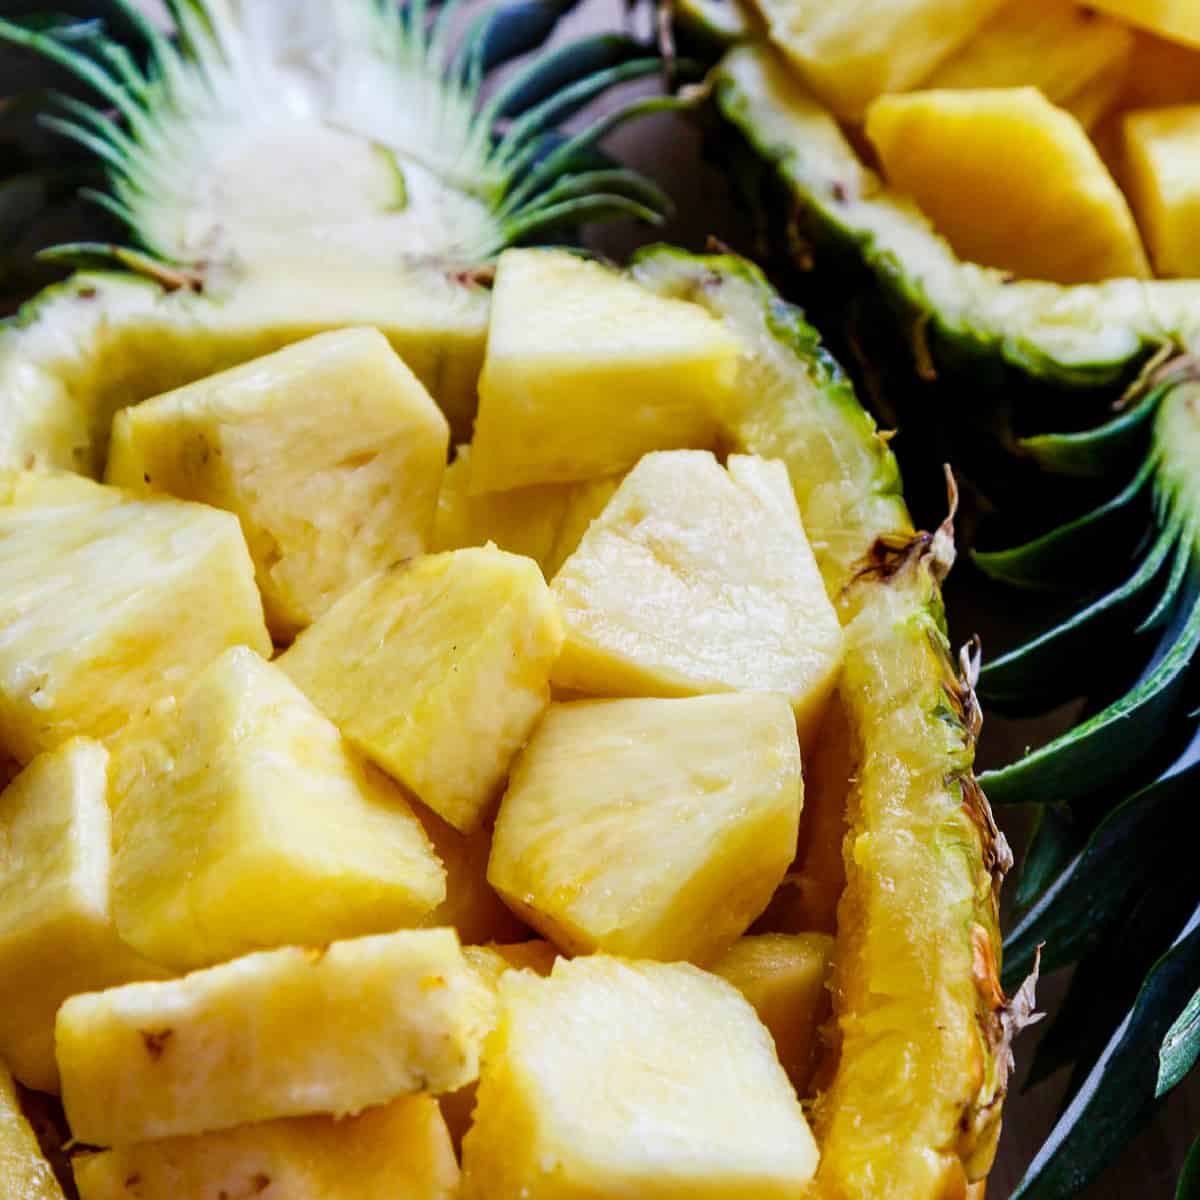 A pineapple bowl filled with fresh cut chunks of pineapple ready to eat.